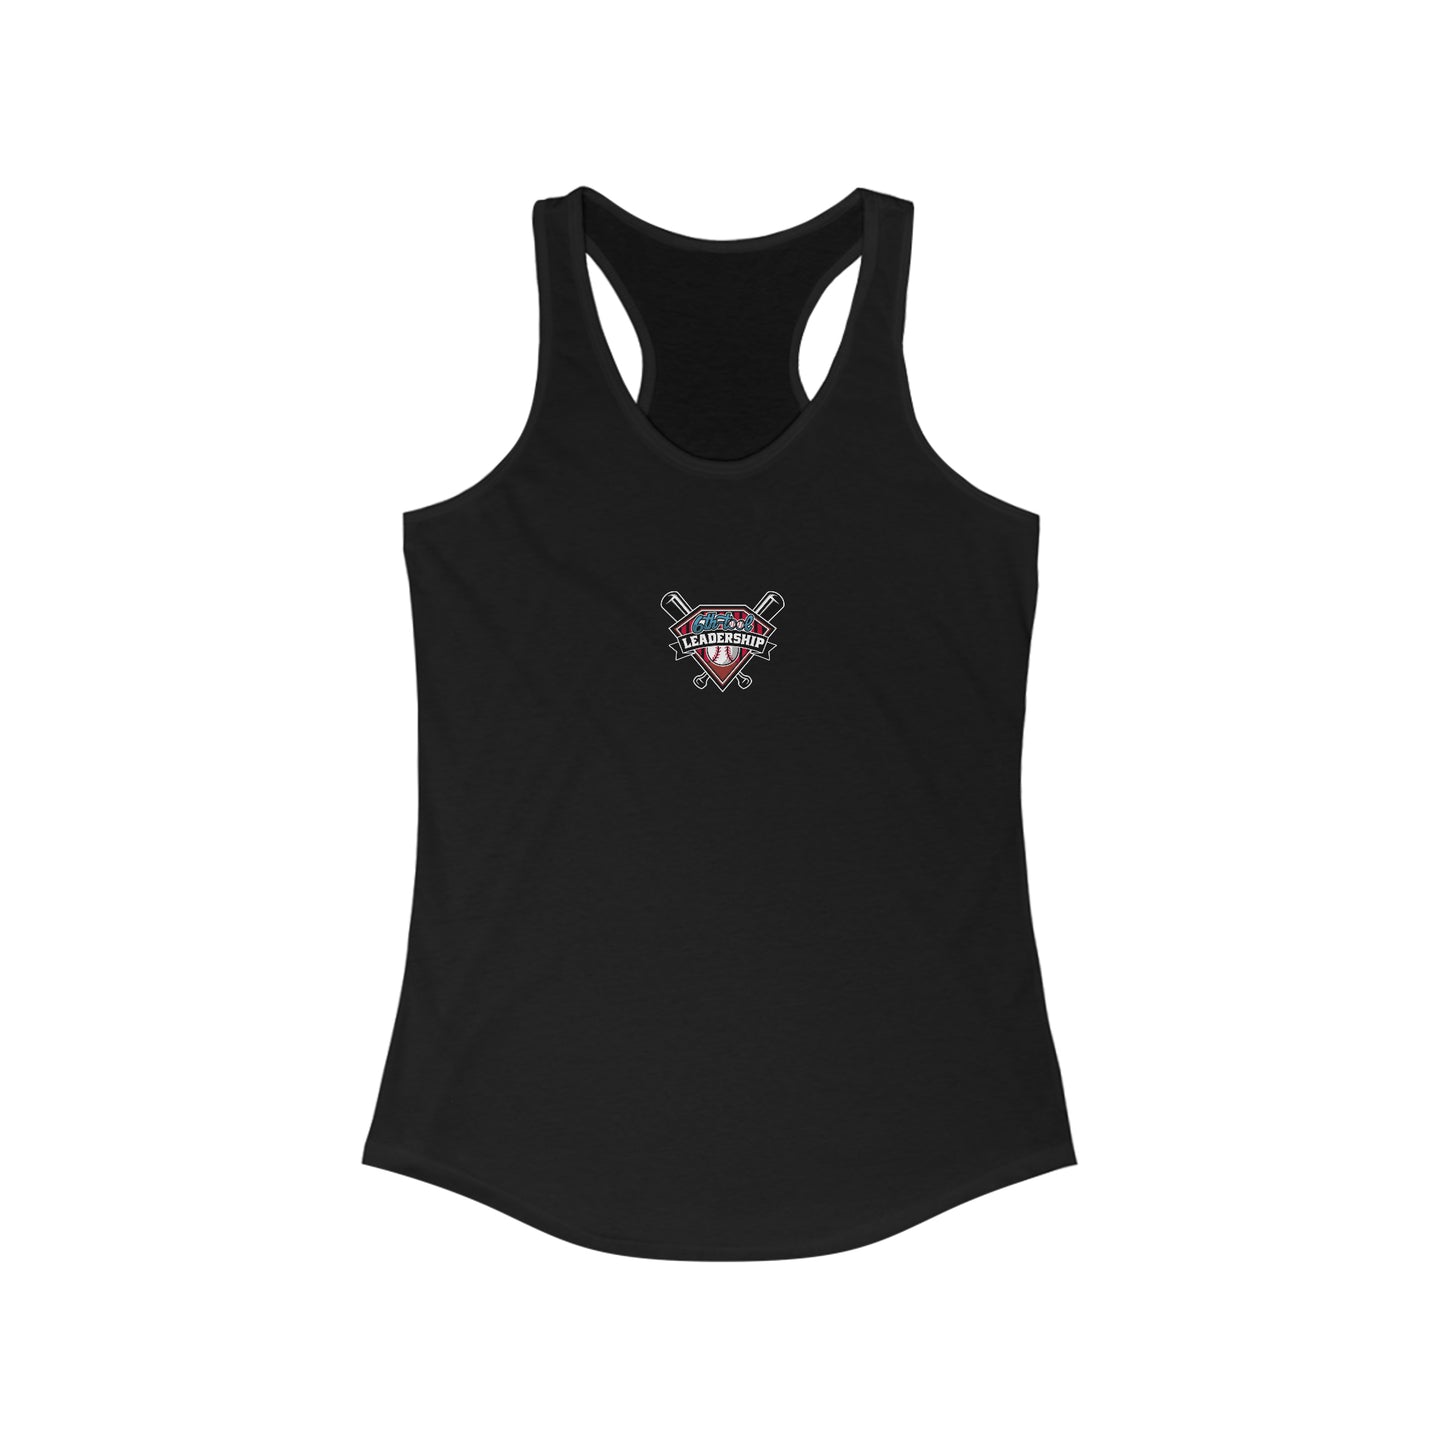 Inside Fastball Front Patch Women's Ideal Racerback Tank